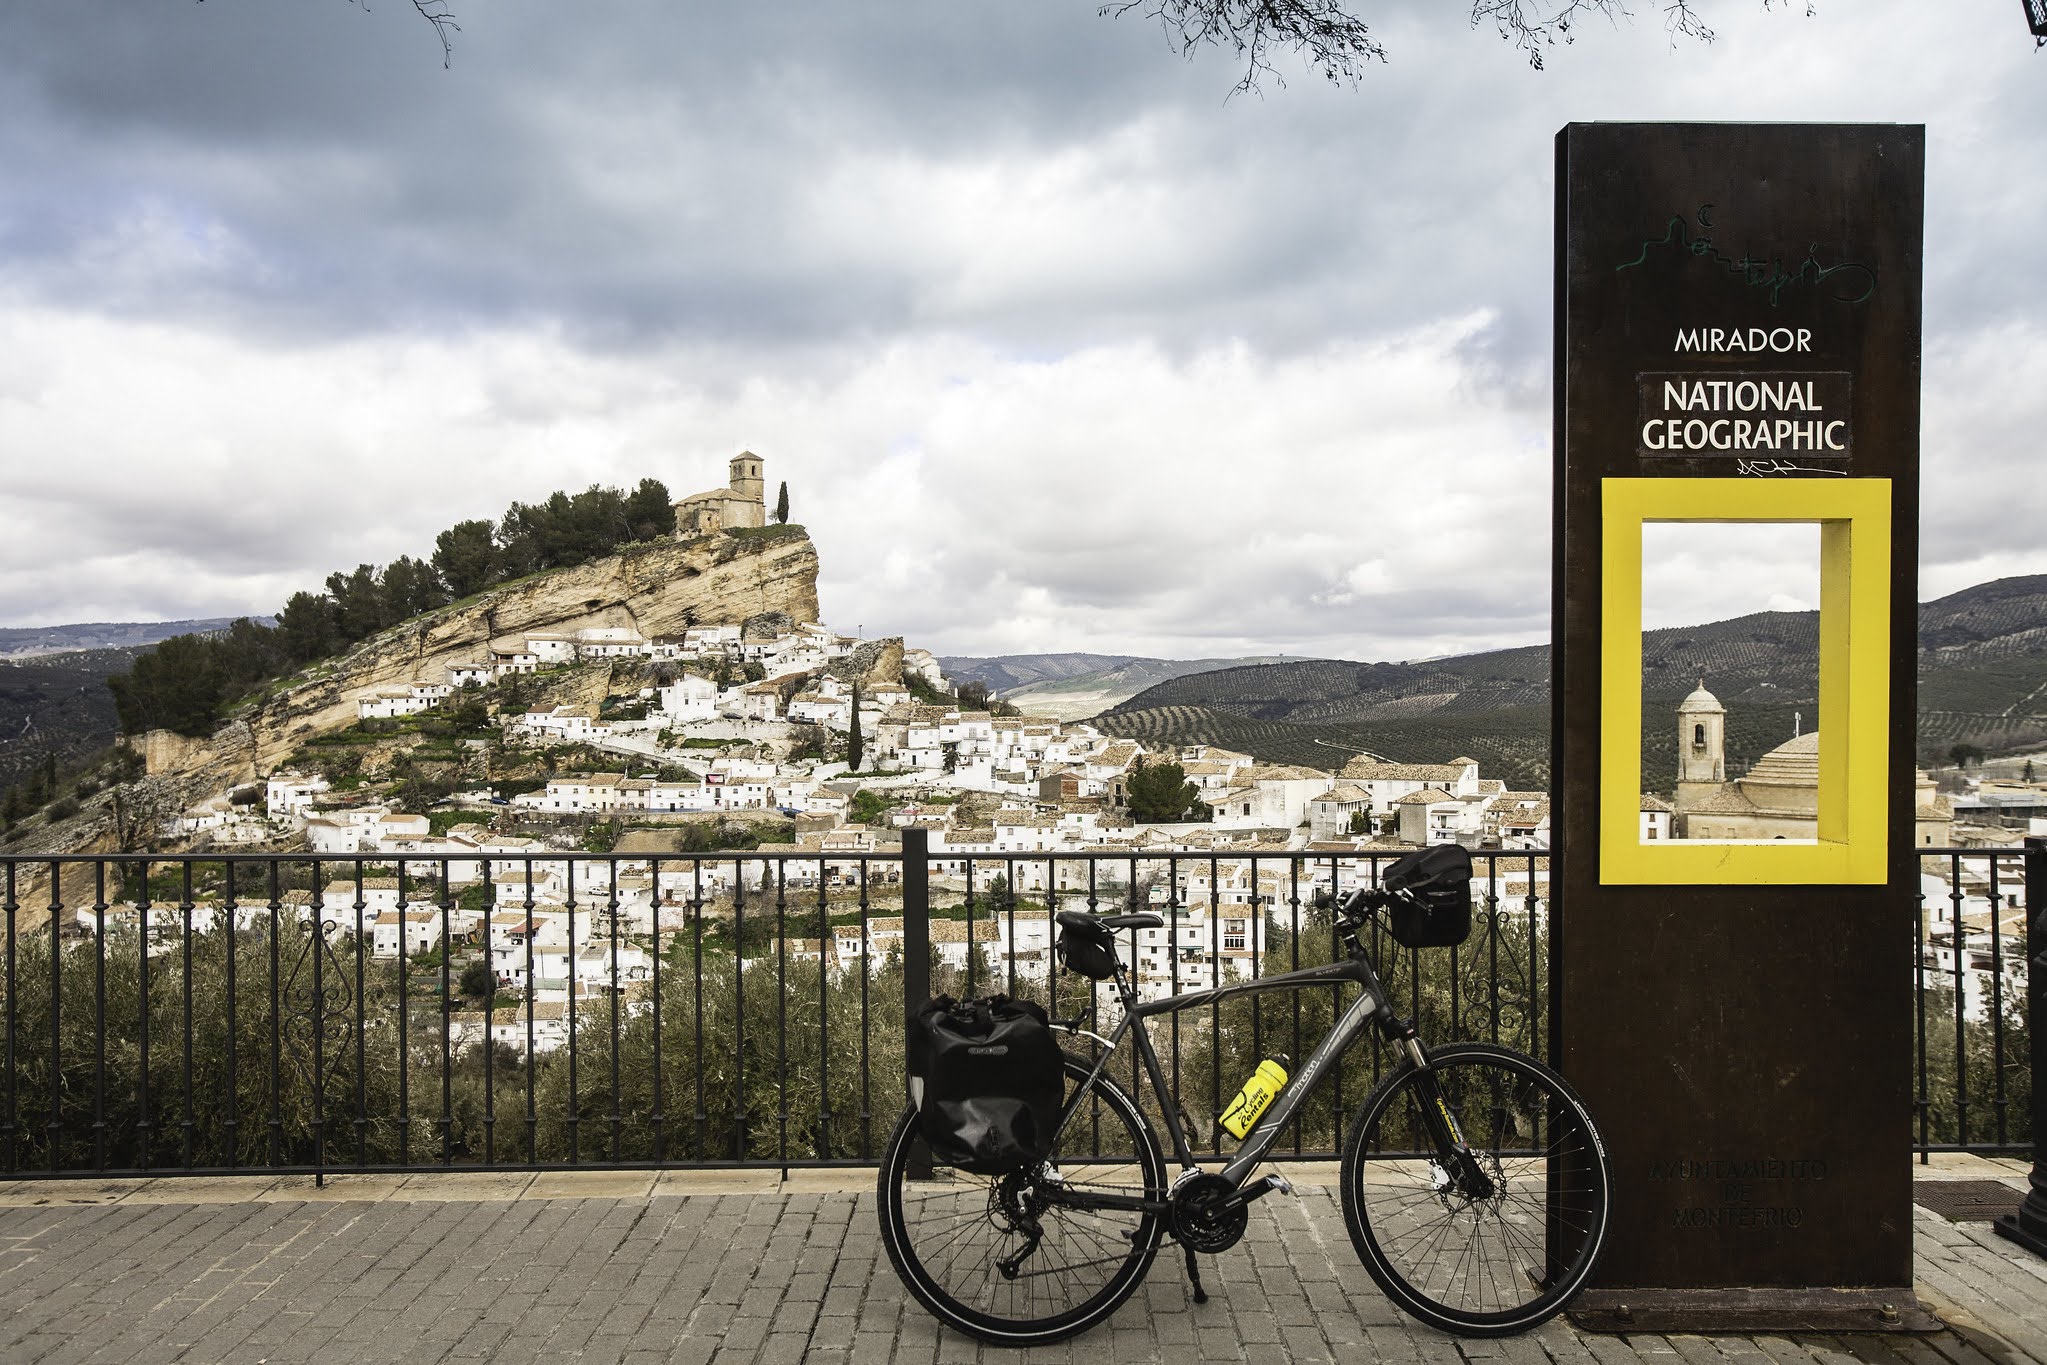 Spain village with bike and national geographic sign